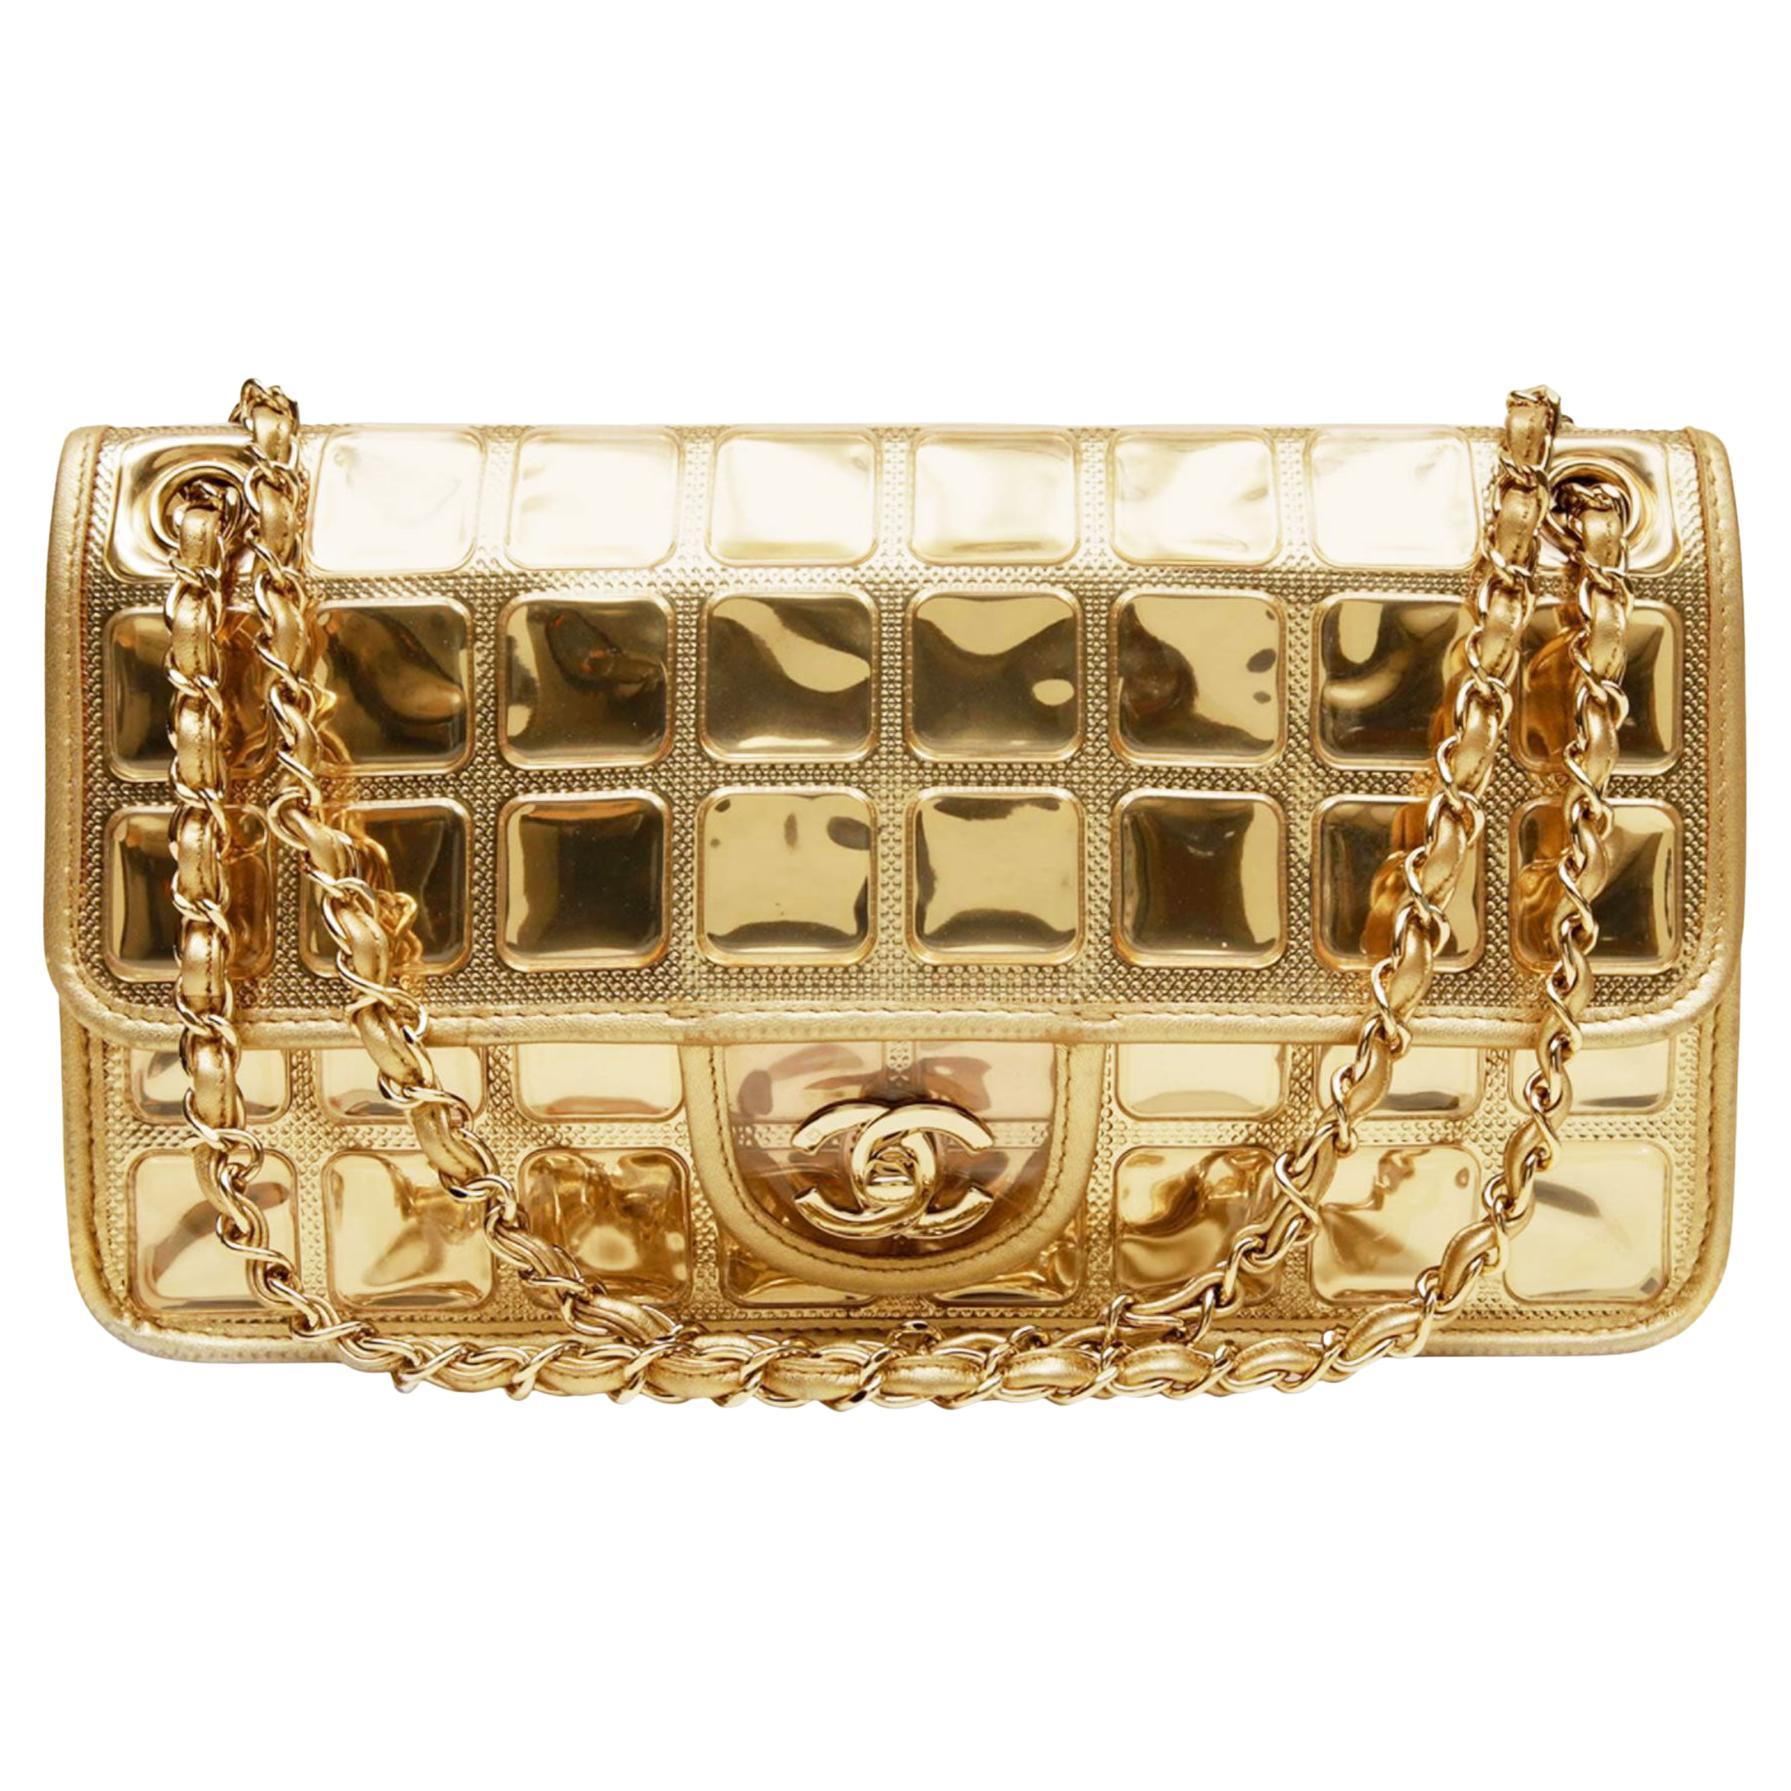 Chanel Limited Edition Ice Cube Flap Metallic Gold Lambskin Leather Shoulder Bag